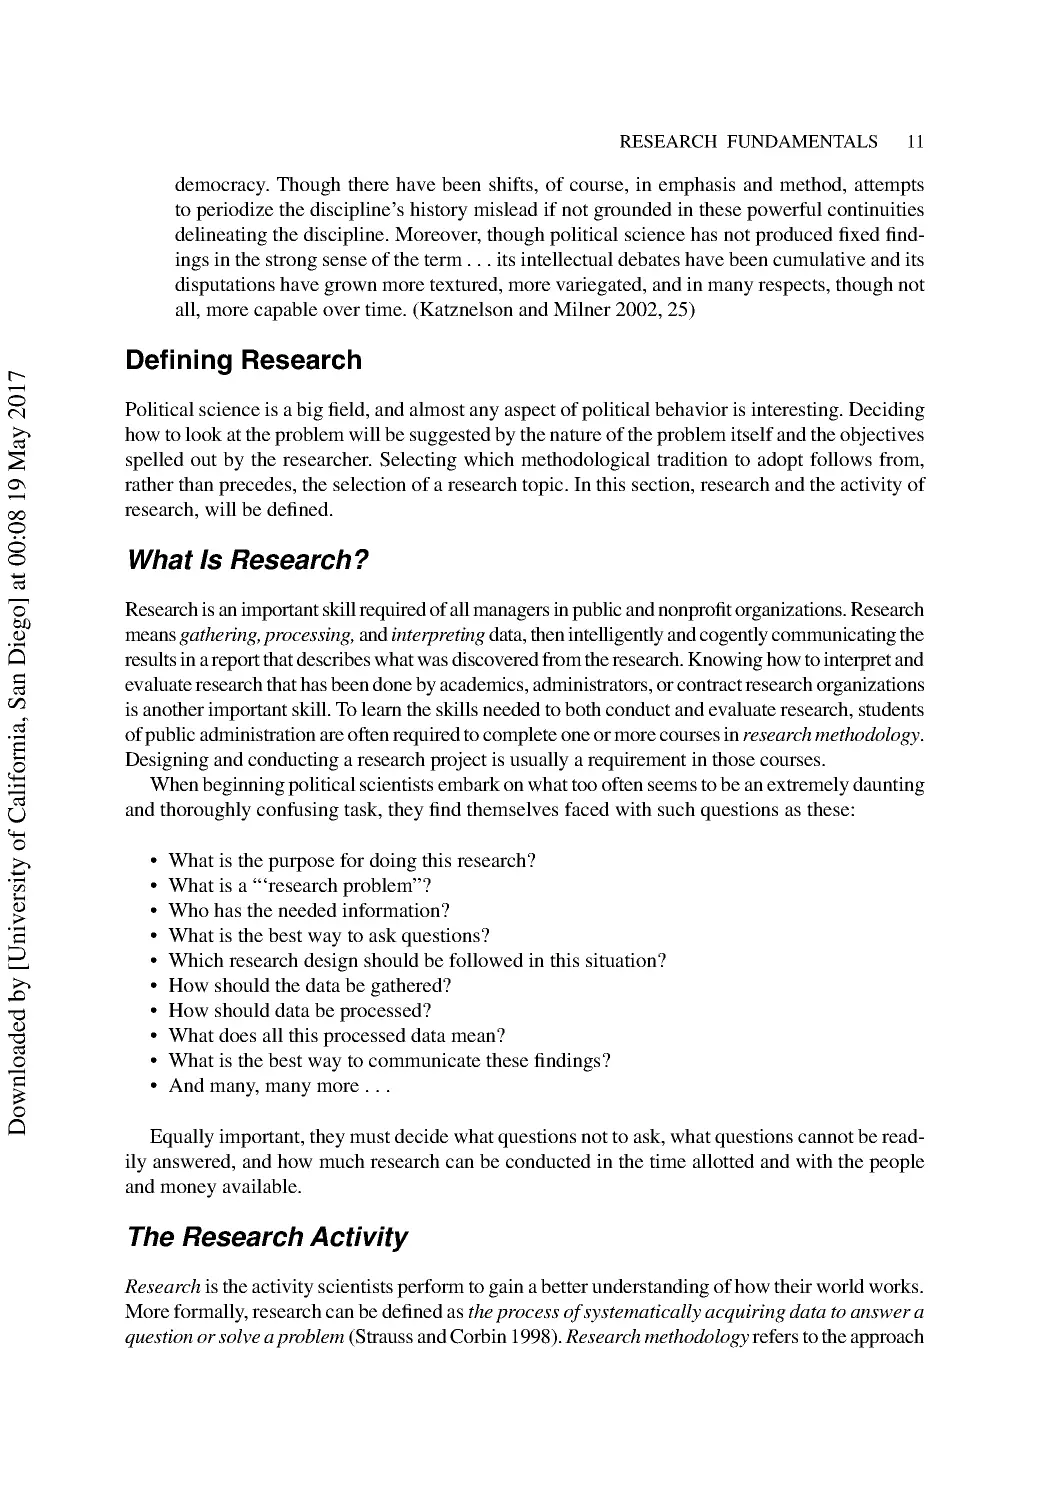 Defining Research